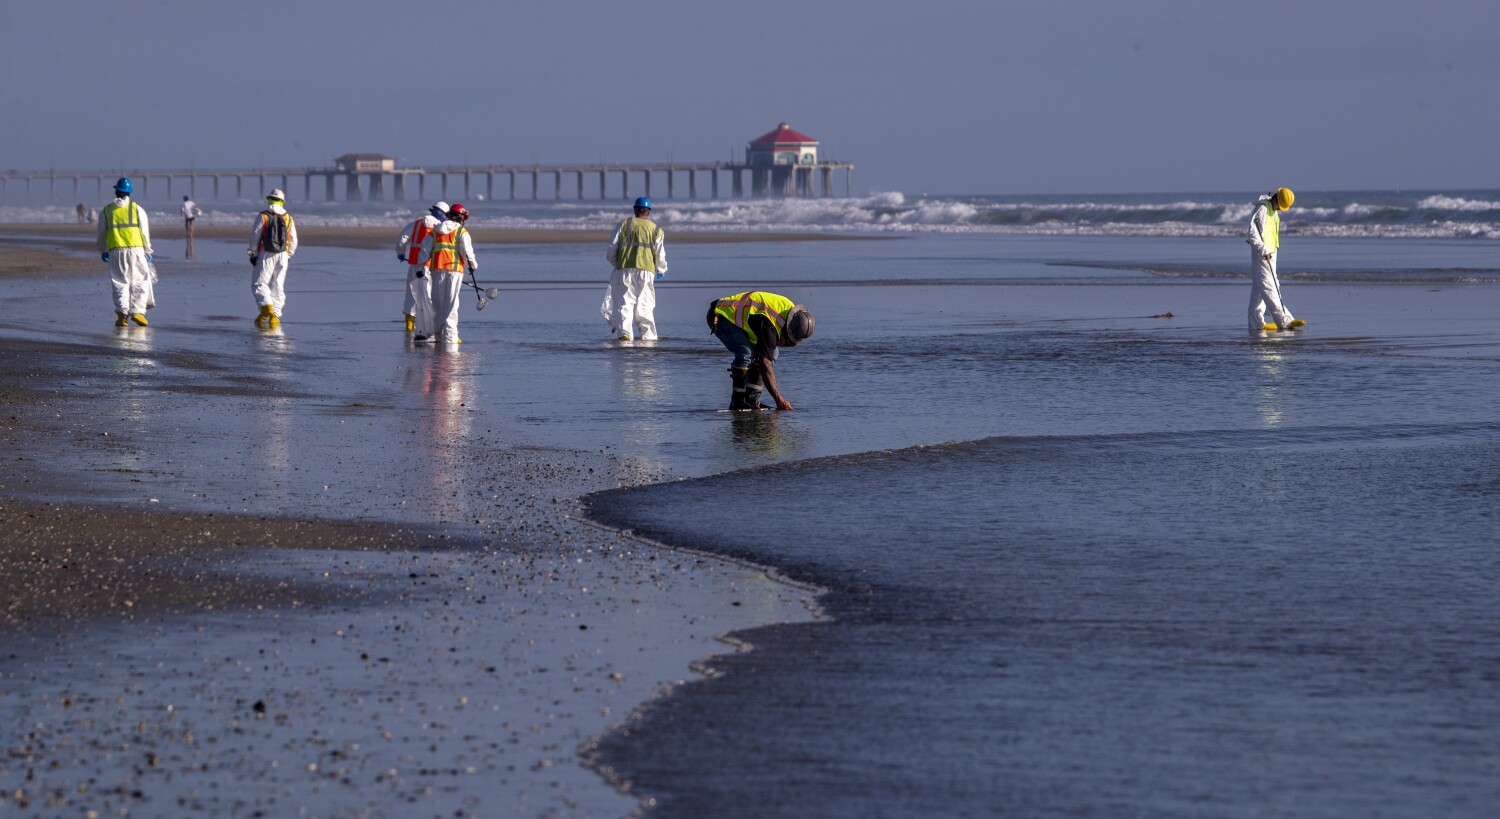 O.C. oil spill leaves many clues, but so far, few answers